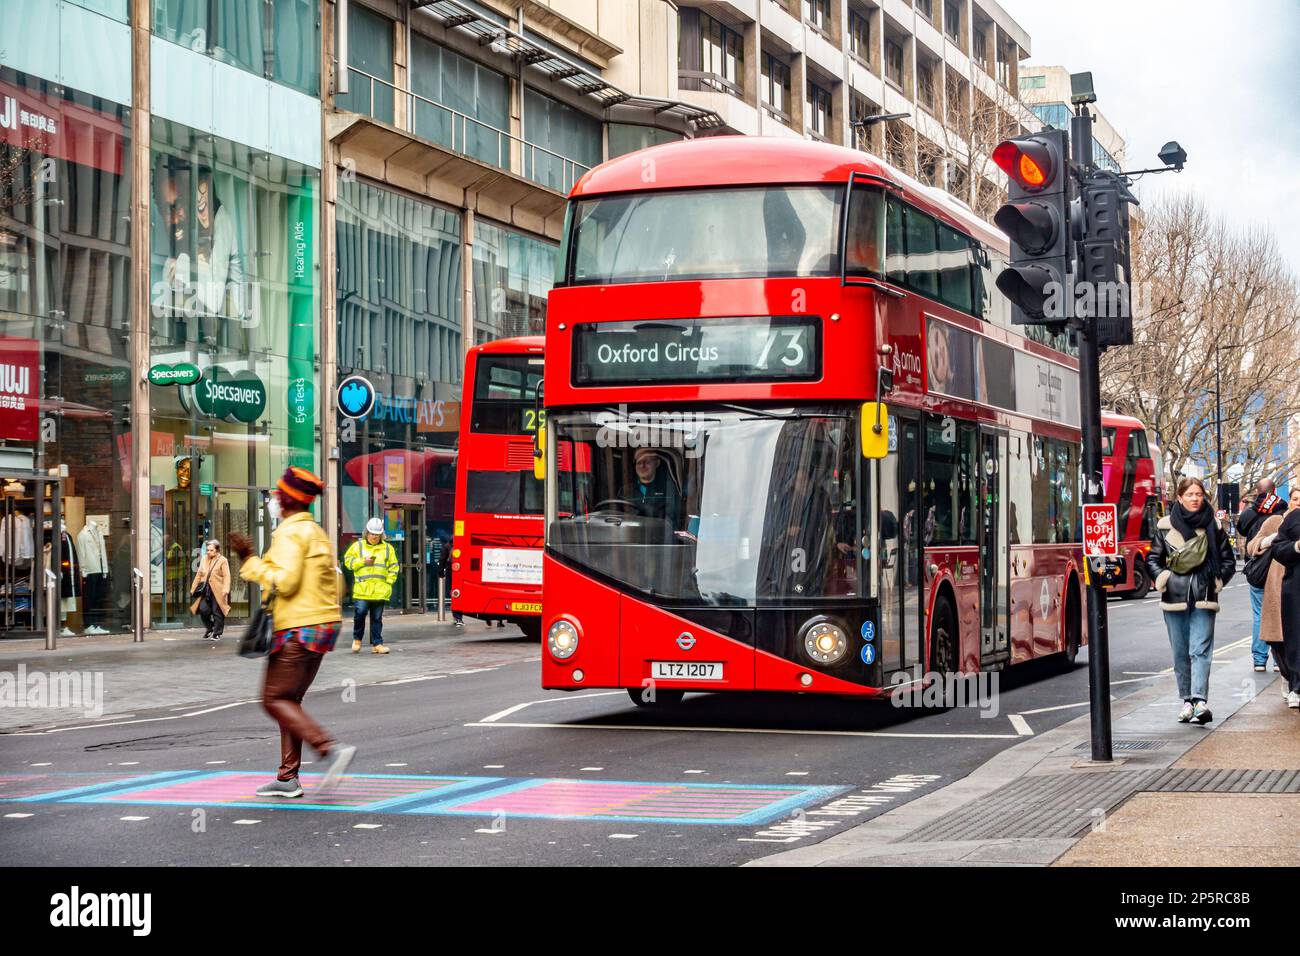 The no. 73 bus, a red double decker bus stops and waits at a pedestrian crossing on Tottenham court Road in London, UK Stock Photo